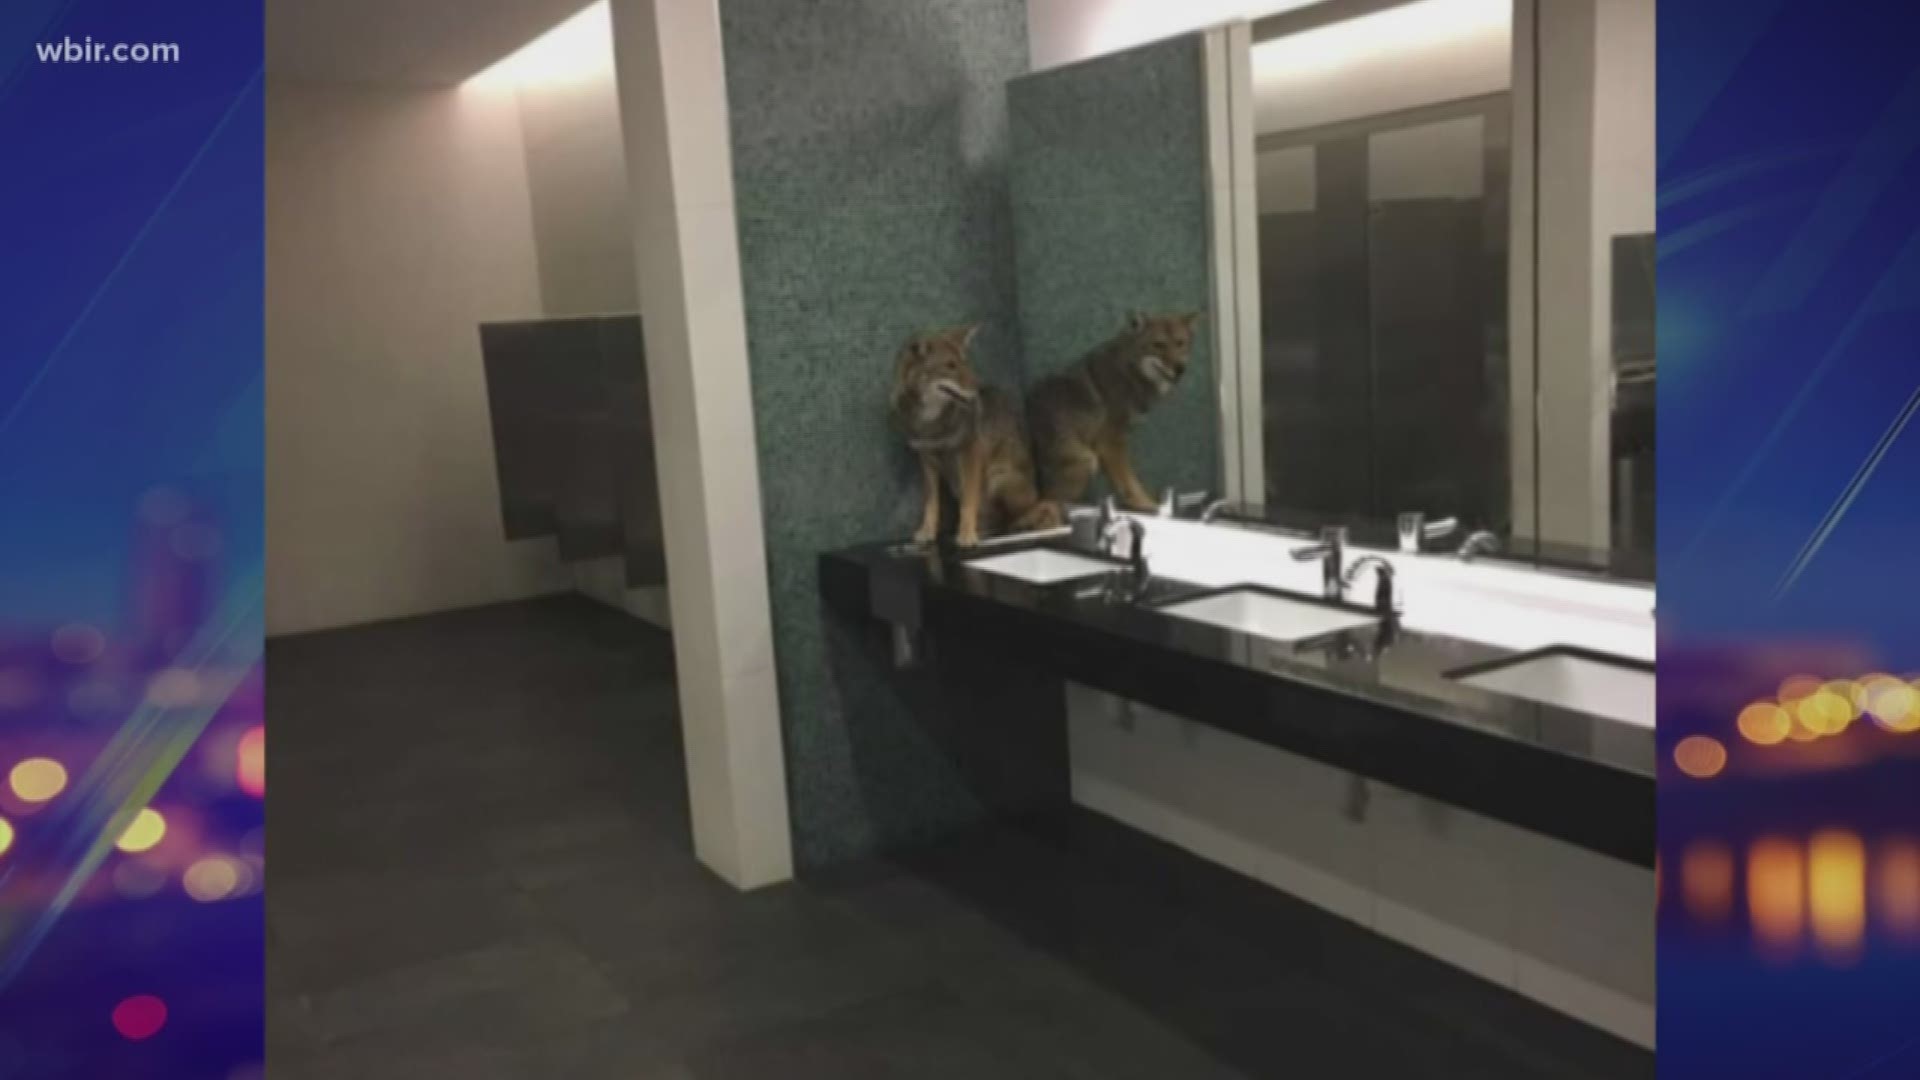 According to officials with the convention center, the coyote ran past a security checkpoint at 7th Avenue South and Korean Veterans Boulevard around 10:20 p.m.